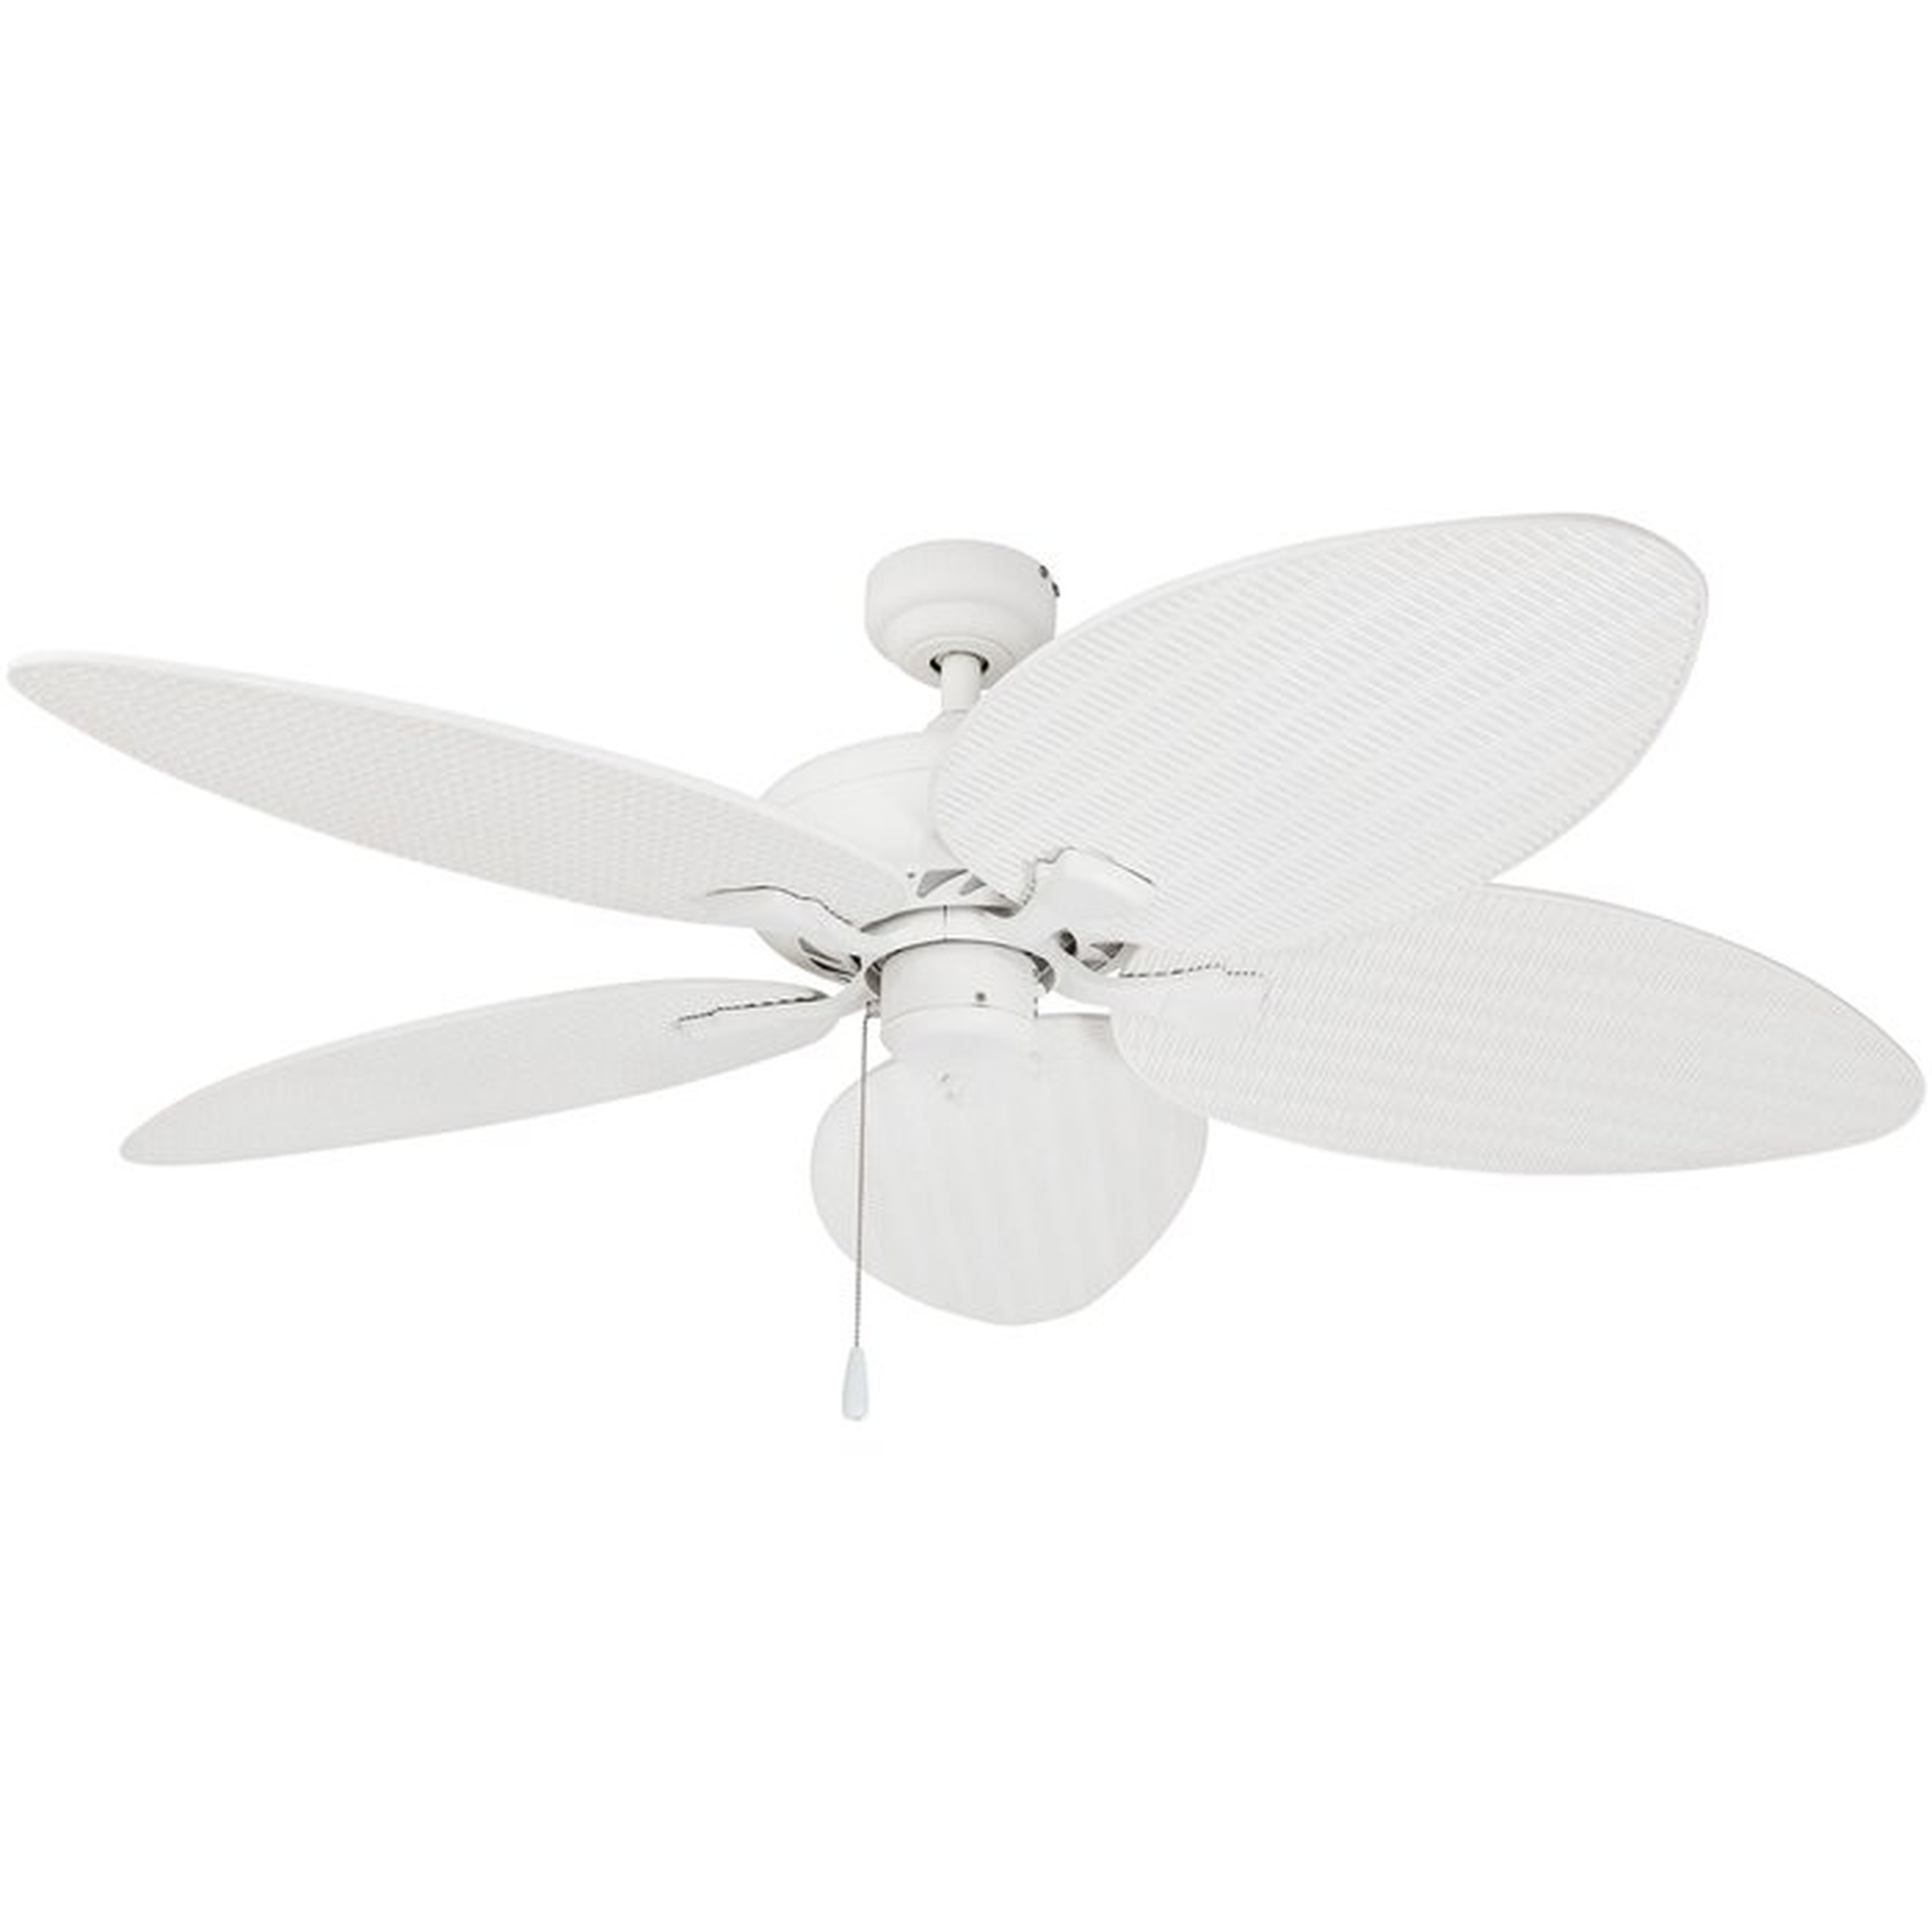 52" Cosgrave Palm Tropical 5 Blade Ceiling Fan, Light Kit Included - Wayfair